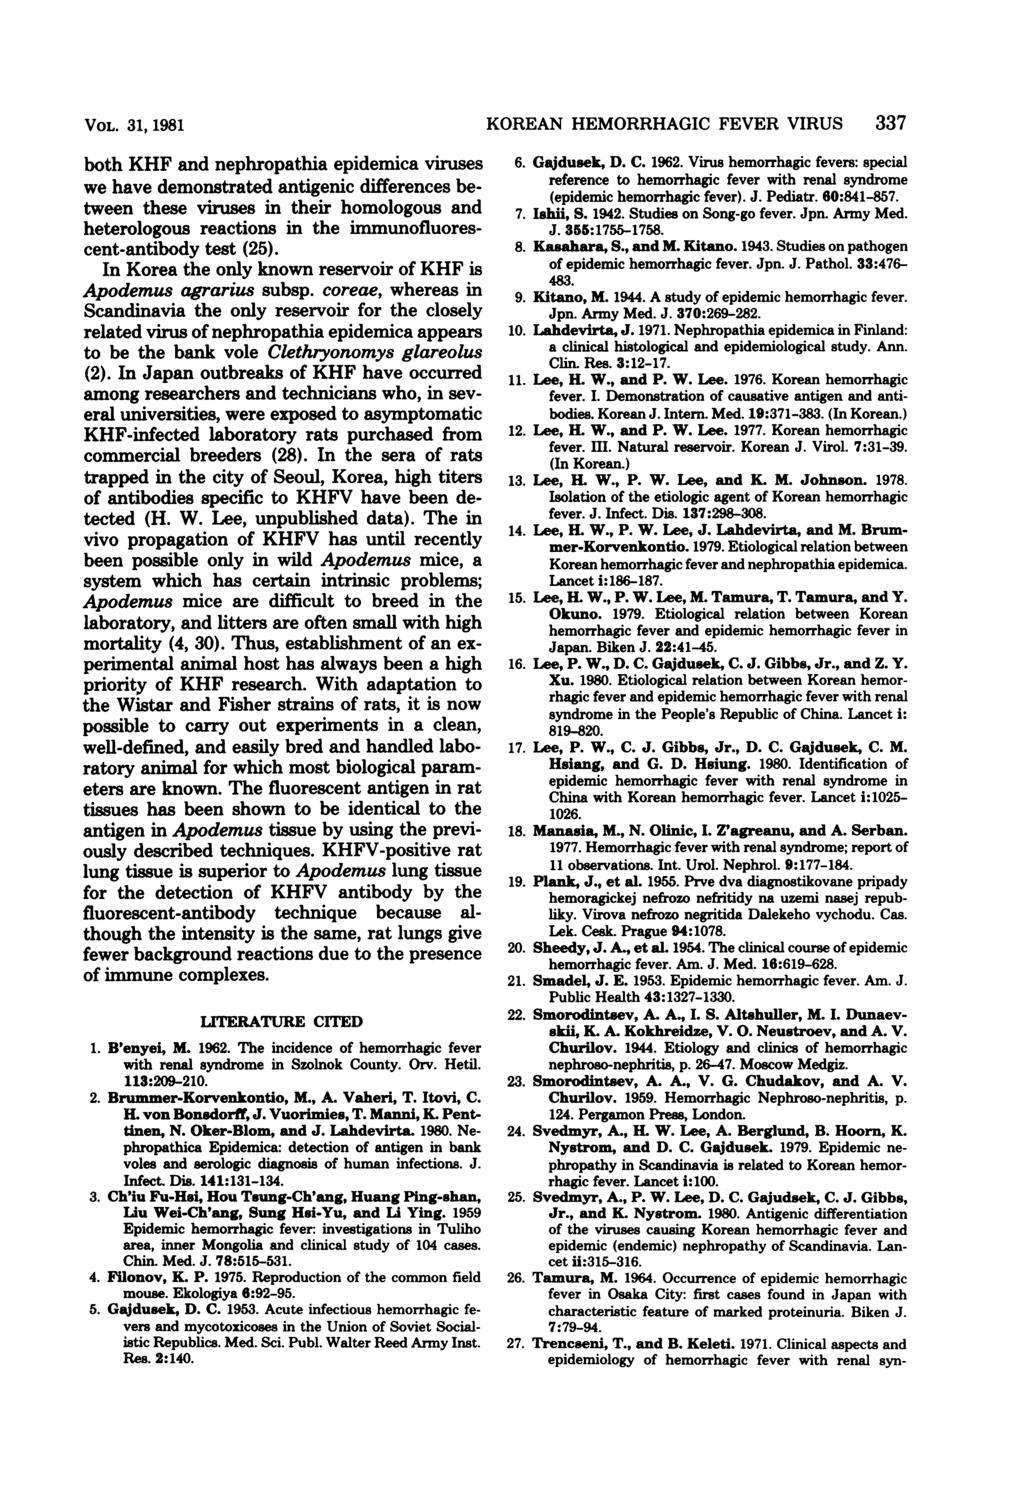 VOL. 31, 1981 both KHF and nephropathia epidemica viruses we have demonstrated antigenic differences between these viruses in their homologous and heterologous reactions in the